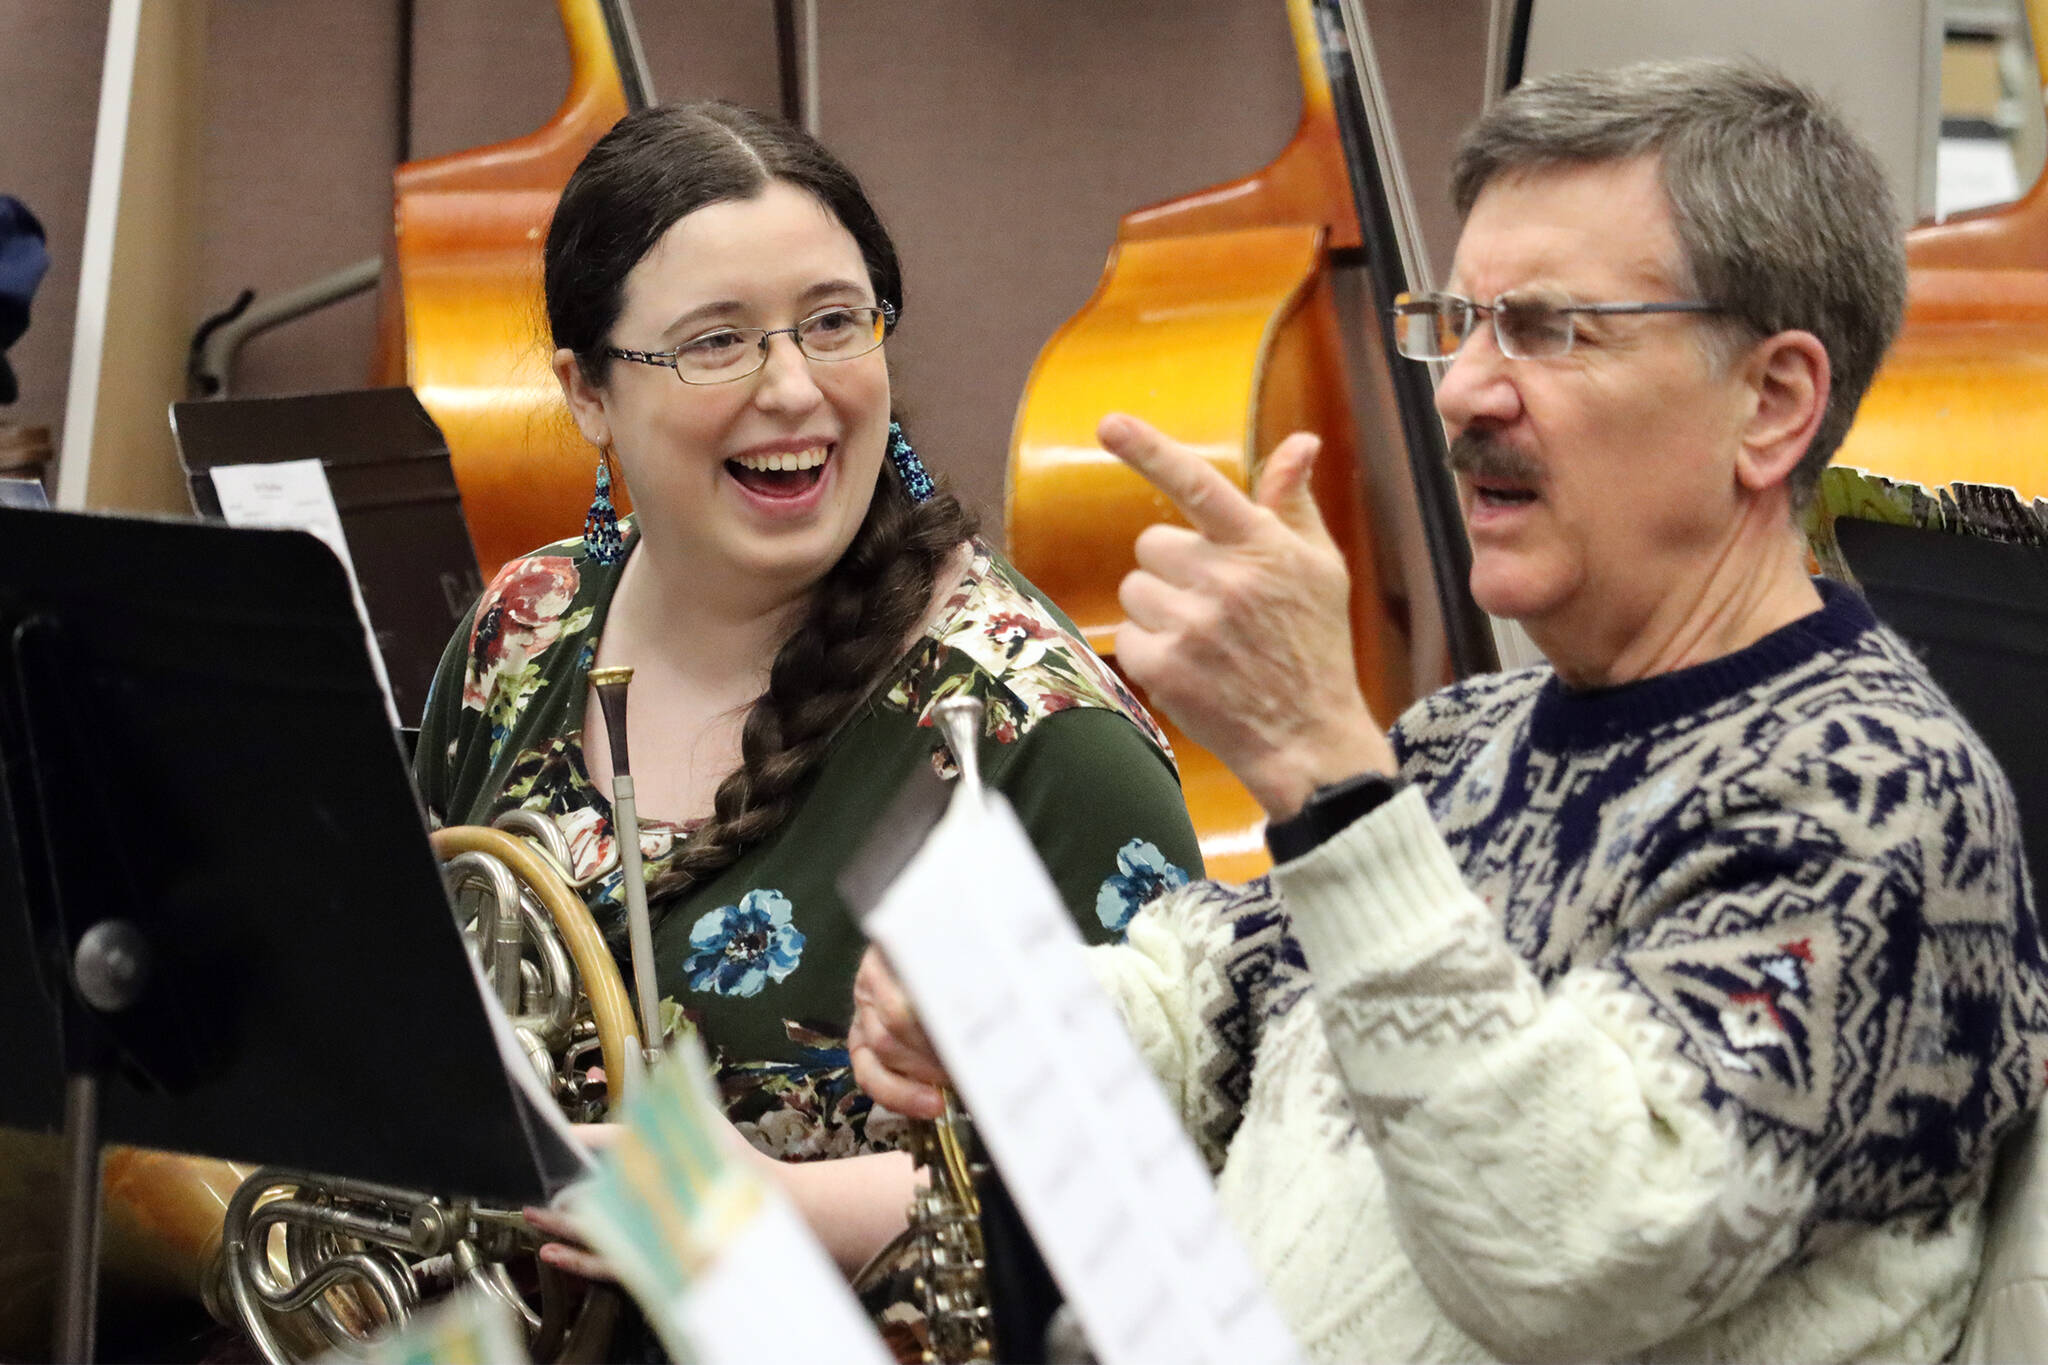 Kristina Paulick and Bill Paulick share a lighthearted moment during a break in playing.